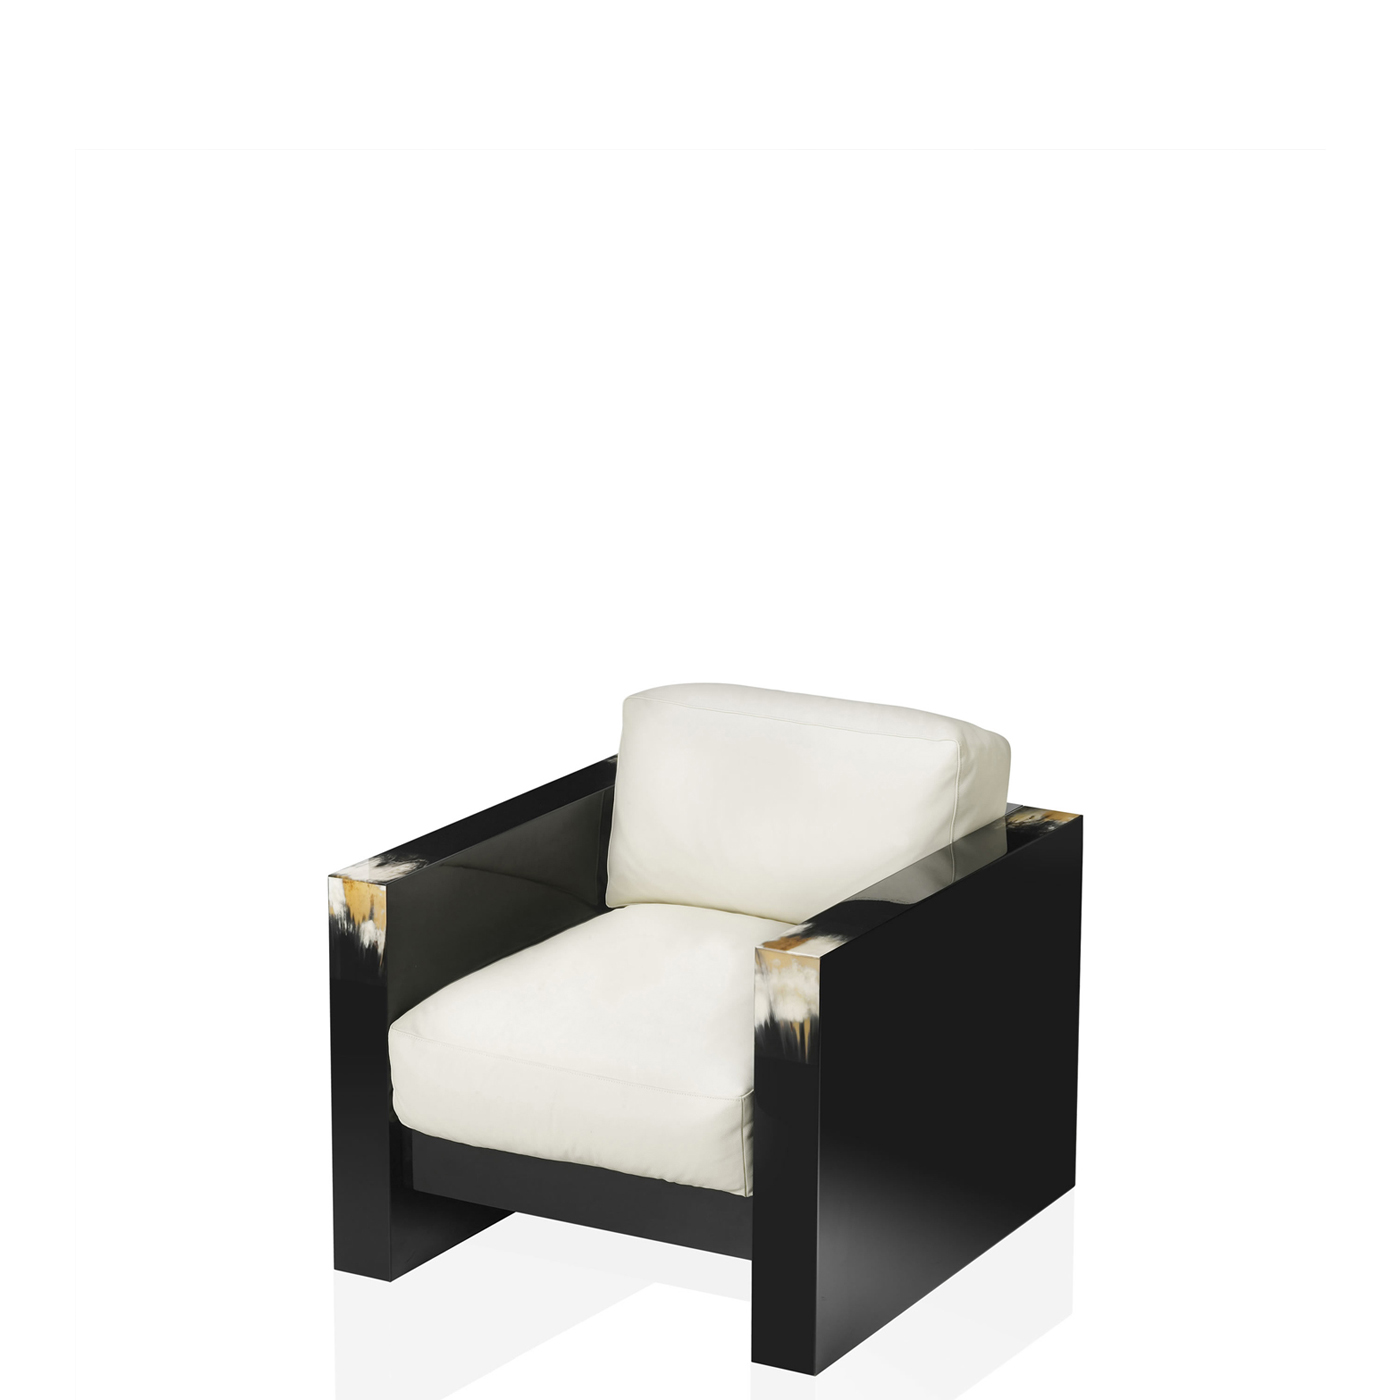 Sofas and seats - Tiberio armchair in glossy black lacquered wood and dark horn - Arcahorn